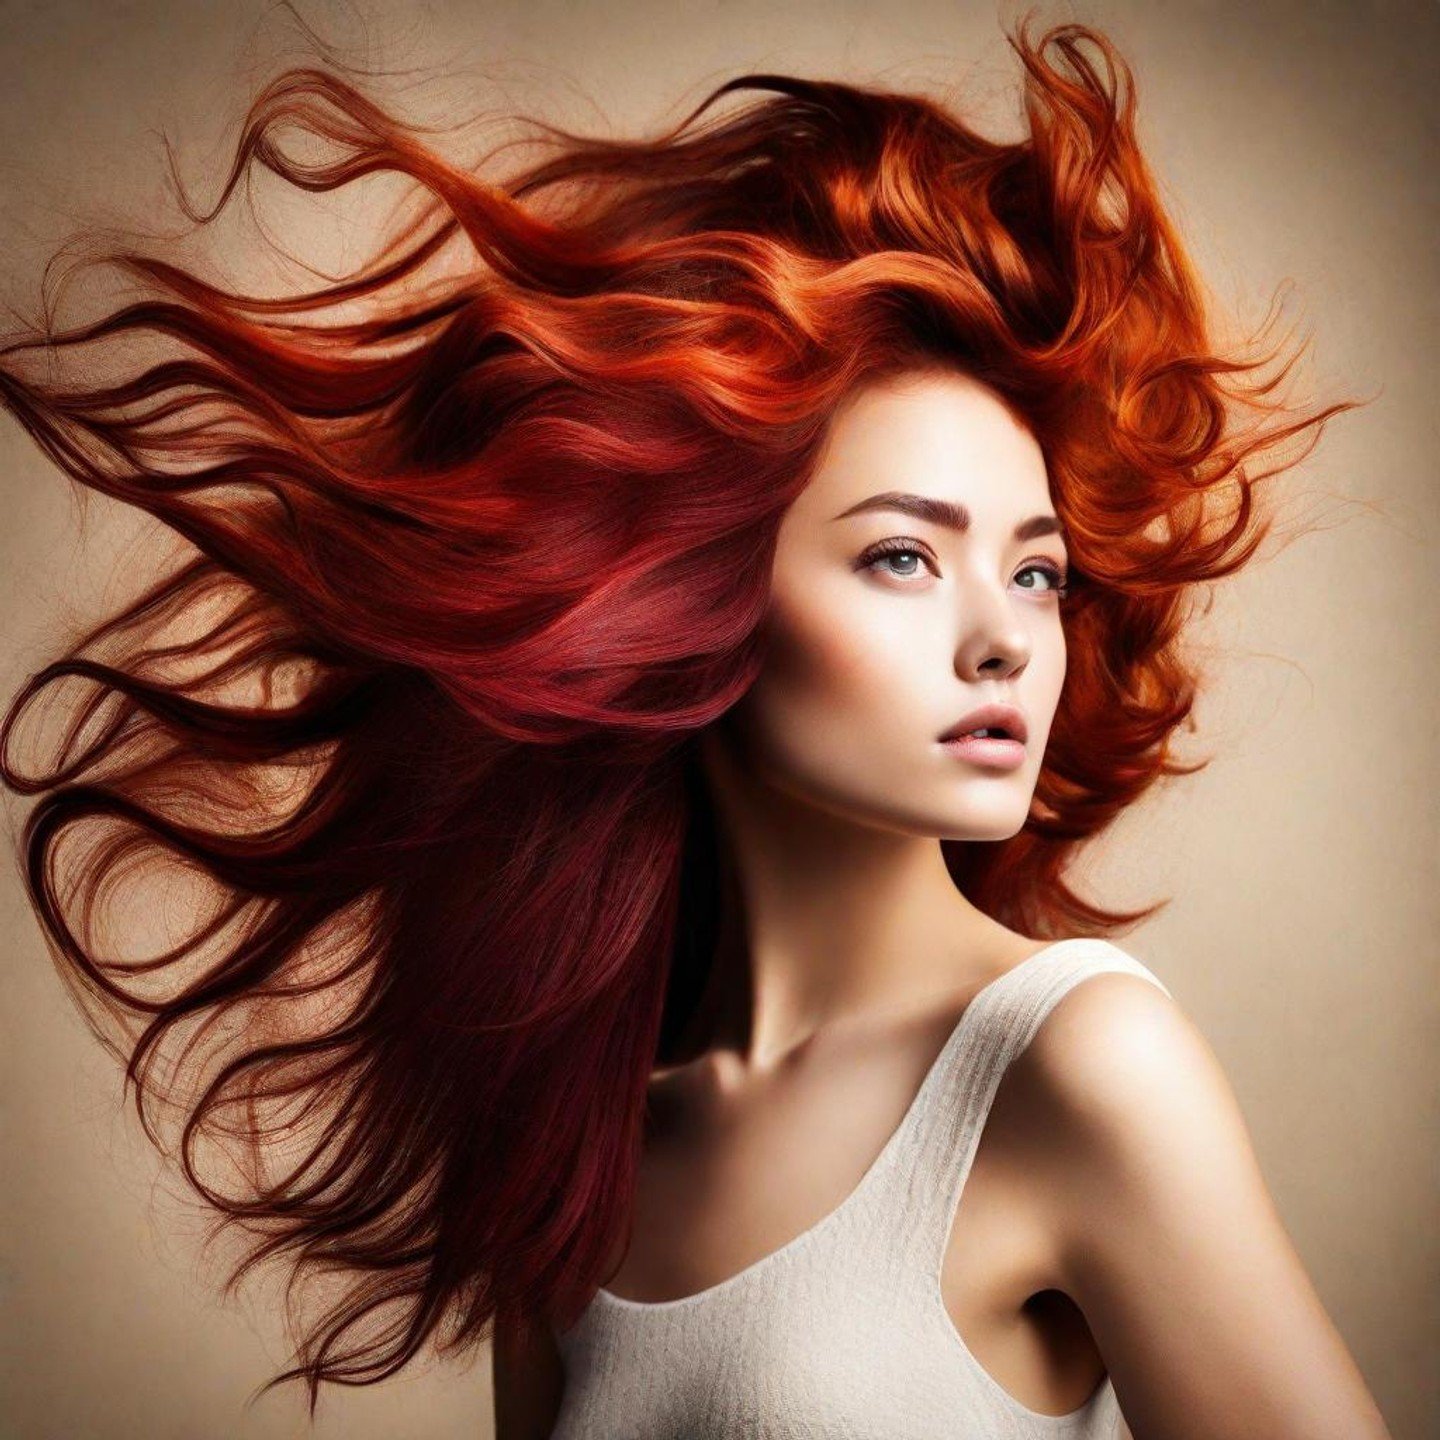 DIY Natural Hair Dye: Homemade Solutions for Vibrant Color